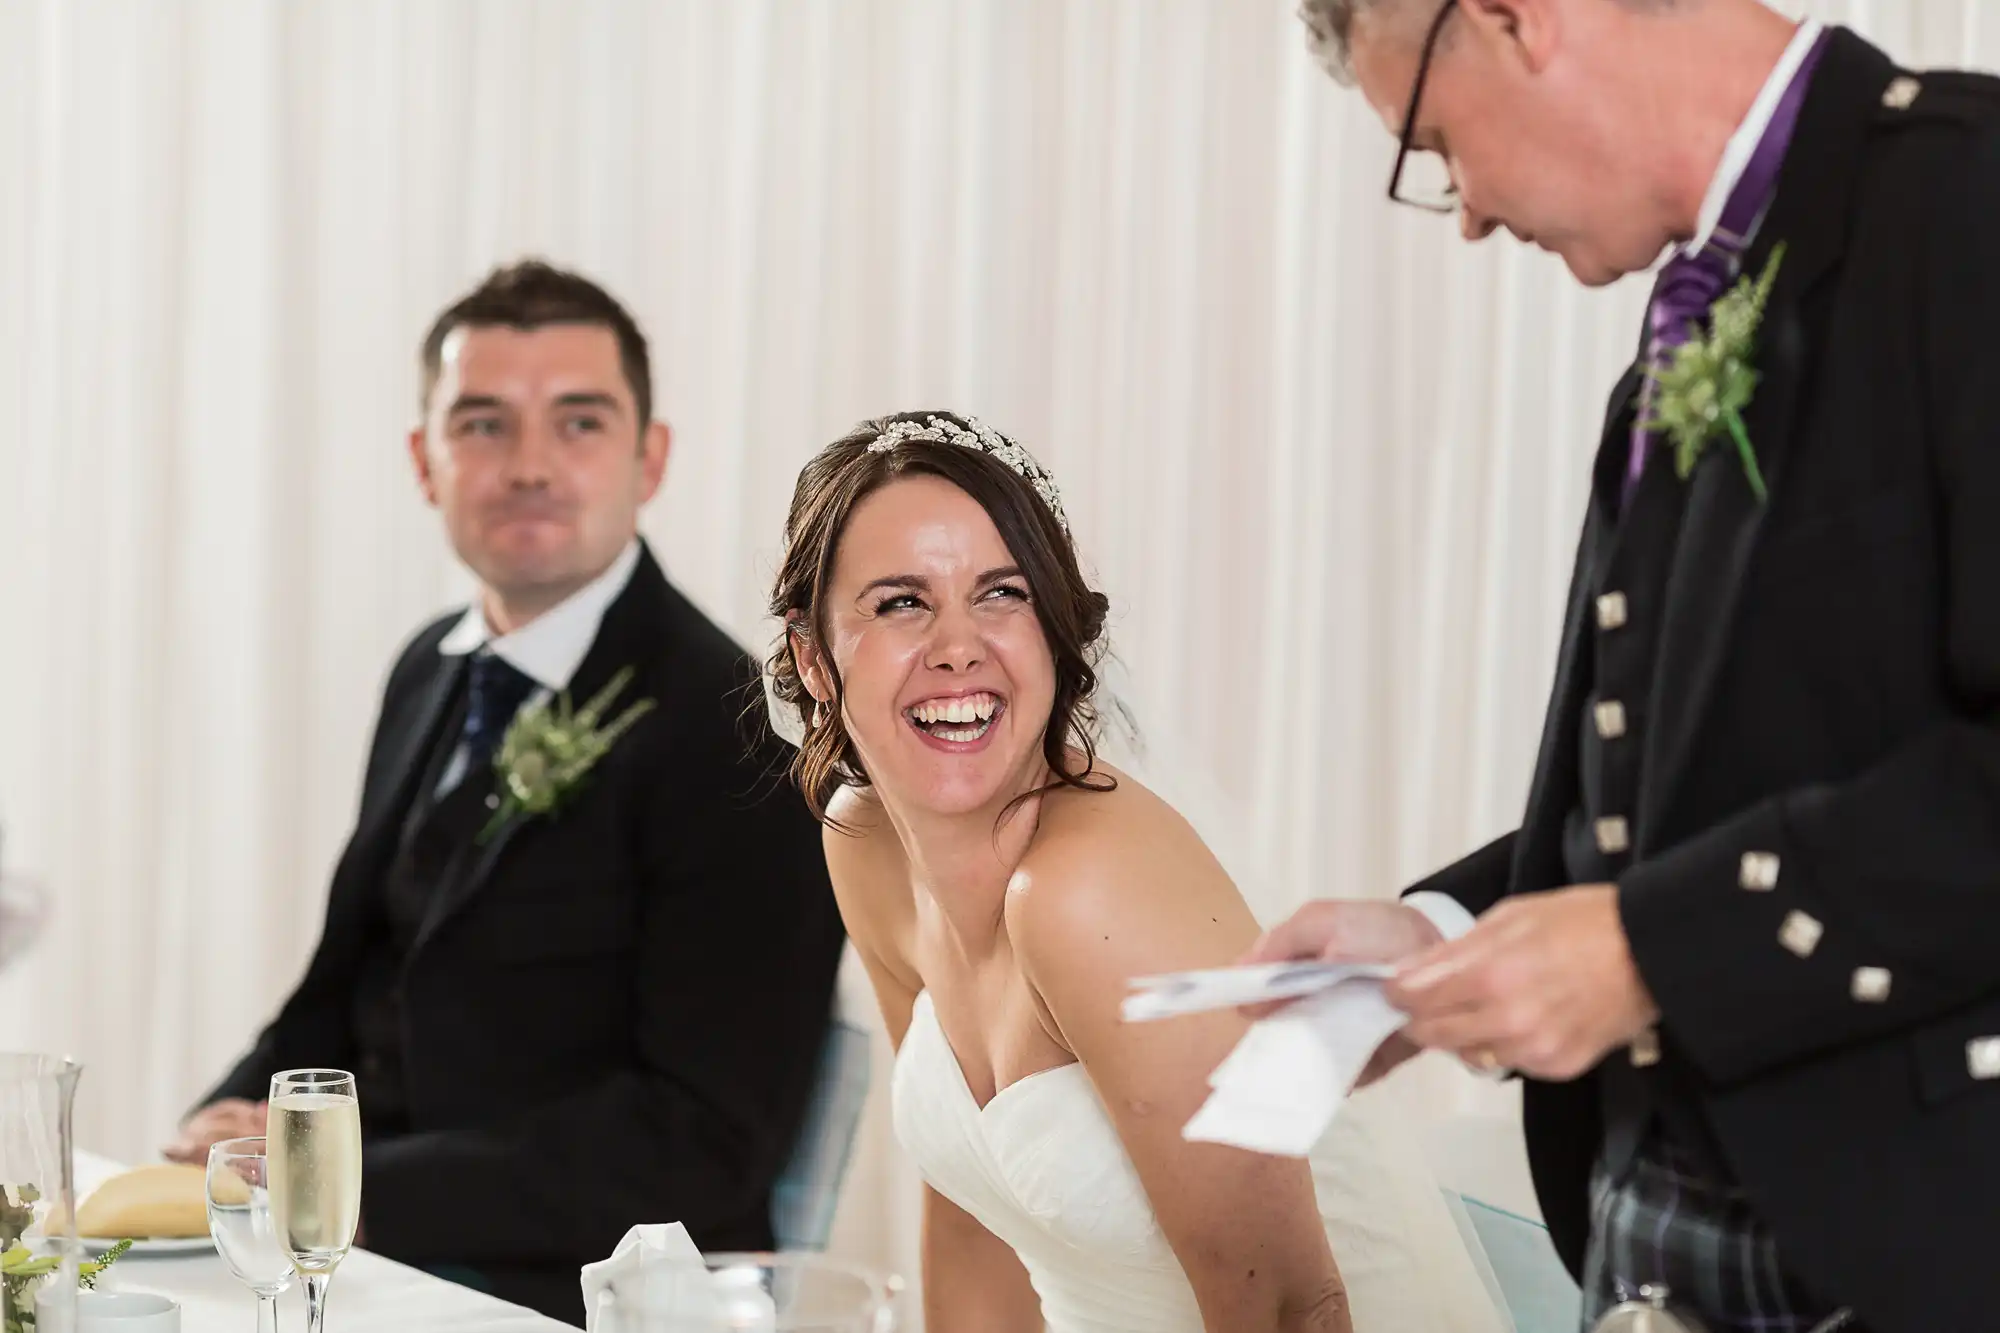 A bride laughing joyously at a wedding reception table as a man presents something, with a groom smiling in the background.